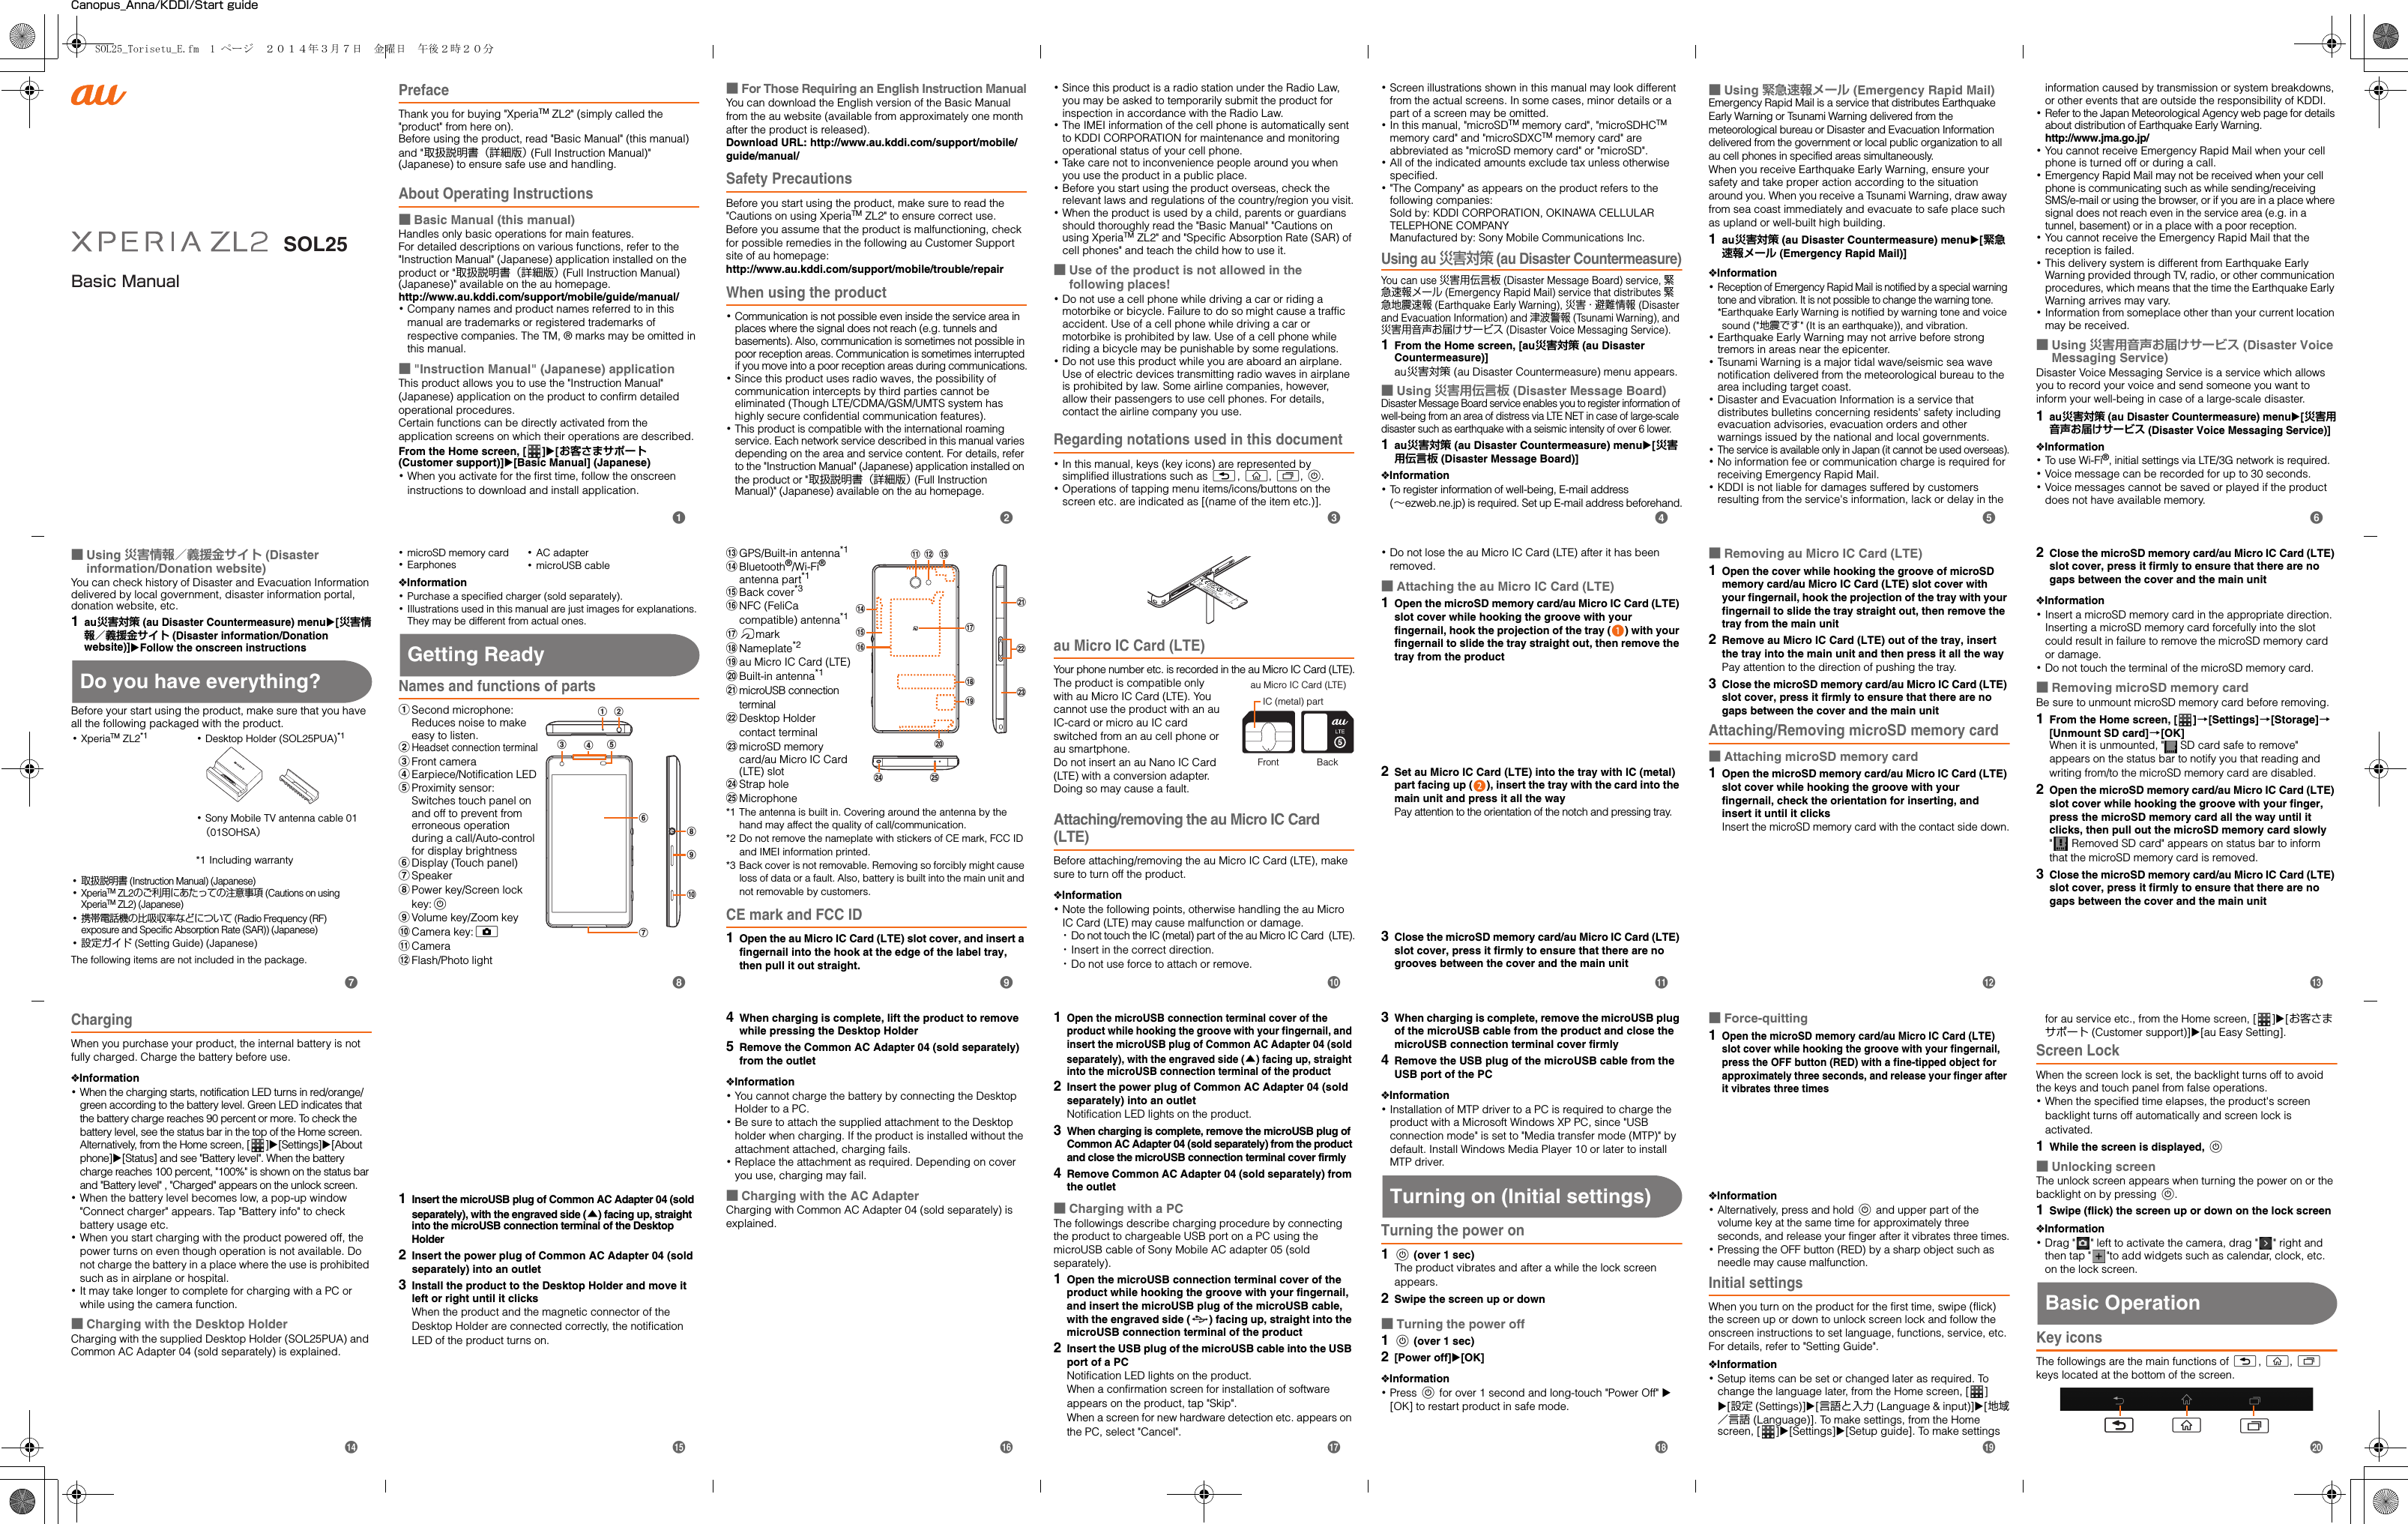 SOL25Basic ManualCanopus_Anna/KDDI/Start guidePrefaceThank you for buying &quot;XperiaTM ZL2&quot; (simply called the &quot;product&quot; from here on). Before using the product, read &quot;Basic Manual&quot; (this manual) and &quot;取扱説明書（詳細版） (Full Instruction Manual)&quot; (Japanese) to ensure safe use and handling.About Operating Instructions■Basic Manual (this manual)Handles only basic operations for main features.For detailed descriptions on various functions, refer to the &quot;Instruction Manual&quot; (Japanese) application installed on the product or &quot;取扱説明書（詳細版） (Full Instruction Manual) (Japanese)&quot; available on the au homepage.http://www.au.kddi.com/support/mobile/guide/manual/･Company names and product names referred to in this manual are trademarks or registered trademarks of respective companies. The TM, ® marks may be omitted in this manual.■&quot;Instruction Manual&quot; (Japanese) applicationThis product allows you to use the &quot;Instruction Manual&quot; (Japanese) application on the product to confirm detailed operational procedures.Certain functions can be directly activated from the application screens on which their operations are described.From the Home screen, [ ]X[お客さまサポート (Customer support)]X[Basic Manual] (Japanese)･When you activate for the first time, follow the onscreen instructions to download and install application.■For Those Requiring an English Instruction ManualYou can download the English version of the Basic Manual from the au website (available from approximately one month after the product is released). Download URL: http://www.au.kddi.com/support/mobile/guide/manual/Safety PrecautionsBefore you start using the product, make sure to read the &quot;Cautions on using XperiaTM ZL2&quot; to ensure correct use.Before you assume that the product is malfunctioning, check for possible remedies in the following au Customer Support site of au homepage:http://www.au.kddi.com/support/mobile/trouble/repairWhen using the product･Communication is not possible even inside the service area in places where the signal does not reach (e.g. tunnels and basements). Also, communication is sometimes not possible in poor reception areas. Communication is sometimes interrupted if you move into a poor reception areas during communications.･Since this product uses radio waves, the possibility of communication intercepts by third parties cannot be eliminated (Though LTE/CDMA/GSM/UMTS system has highly secure confidential communication features).･This product is compatible with the international roaming service. Each network service described in this manual varies depending on the area and service content. For details, refer to the &quot;Instruction Manual&quot; (Japanese) application installed on the product or &quot;取扱説明書（詳細版） (Full Instruction Manual)&quot; (Japanese) available on the au homepage.･Since this product is a radio station under the Radio Law, you may be asked to temporarily submit the product for inspection in accordance with the Radio Law.･The IMEI information of the cell phone is automatically sent to KDDI CORPORATION for maintenance and monitoring operational status of your cell phone.･Take care not to inconvenience people around you when you use the product in a public place.･Before you start using the product overseas, check the relevant laws and regulations of the country/region you visit.･When the product is used by a child, parents or guardians should thoroughly read the &quot;Basic Manual&quot; &quot;Cautions on using XperiaTM ZL2&quot; and &quot;Specific Absorption Rate (SAR) of cell phones&quot; and teach the child how to use it.■Use of the product is not allowed in the following places!･Do not use a cell phone while driving a car or riding a motorbike or bicycle. Failure to do so might cause a traffic accident. Use of a cell phone while driving a car or motorbike is prohibited by law. Use of a cell phone while riding a bicycle may be punishable by some regulations.･Do not use this product while you are aboard an airplane. Use of electric devices transmitting radio waves in airplane is prohibited by law. Some airline companies, however, allow their passengers to use cell phones. For details, contact the airline company you use.Regarding notations used in this document･In this manual, keys (key icons) are represented by simplified illustrations such as x, y, r, P.･Operations of tapping menu items/icons/buttons on the screen etc. are indicated as [(name of the item etc.)].･Screen illustrations shown in this manual may look different from the actual screens. In some cases, minor details or a part of a screen may be omitted.･In this manual, &quot;microSDTM memory card&quot;, &quot;microSDHCTM memory card&quot; and &quot;microSDXCTM memory card&quot; are abbreviated as &quot;microSD memory card&quot; or &quot;microSD&quot;.･All of the indicated amounts exclude tax unless otherwise specified.･&quot;The Company&quot; as appears on the product refers to the following companies: Sold by: KDDI CORPORATION, OKINAWA CELLULAR TELEPHONE COMPANYManufactured by: Sony Mobile Communications Inc.Using au 災害対策 (au Disaster Countermeasure)You can use 災害用伝言板 (Disaster Message Board) service, 緊急速報メール (Emergency Rapid Mail) service that distributes 緊急地震速報 (Earthquake Early Warning), 災害・避難情報 (Disaster and Evacuation Information) and 津波警報 (Tsunami Warning), and 災害用音声お届けサービス (Disaster Voice Messaging Service).1From the Home screen, [au災害対策 (au Disaster Countermeasure)]au災害対策 (au Disaster Countermeasure) menu appears.■Using 災害用伝言板 (Disaster Message Board)Disaster Message Board service enables you to register information of well-being from an area of distress via LTE NET in case of large-scale disaster such as earthquake with a seismic intensity of over 6 lower.1au災害対策 (au Disaster Countermeasure) menuX[災害用伝言板 (Disaster Message Board)]❖Information･To register information of well-being, E-mail address (∼ezweb.ne.jp) is required. Set up E-mail address beforehand.■Using 緊急速報メール (Emergency Rapid Mail)Emergency Rapid Mail is a service that distributes Earthquake Early Warning or Tsunami Warning delivered from the meteorological bureau or Disaster and Evacuation Information delivered from the government or local public organization to all au cell phones in specified areas simultaneously.When you receive Earthquake Early Warning, ensure your safety and take proper action according to the situation around you. When you receive a Tsunami Warning, draw away from sea coast immediately and evacuate to safe place such as upland or well-built high building.1au災害対策 (au Disaster Countermeasure) menuX[緊急速報メール (Emergency Rapid Mail)]❖Information･Reception of Emergency Rapid Mail is notified by a special warning tone and vibration. It is not possible to change the warning tone.*Earthquake Early Warning is notified by warning tone and voice sound (&quot;地震です&quot; (It is an earthquake)), and vibration.･Earthquake Early Warning may not arrive before strong tremors in areas near the epicenter.･Tsunami Warning is a major tidal wave/seismic sea wave notification delivered from the meteorological bureau to the area including target coast.･Disaster and Evacuation Information is a service that distributes bulletins concerning residents&apos; safety including evacuation advisories, evacuation orders and other warnings issued by the national and local governments.･The service is available only in Japan (it cannot be used overseas).･No information fee or communication charge is required for receiving Emergency Rapid Mail.･KDDI is not liable for damages suffered by customers resulting from the service&apos;s information, lack or delay in the information caused by transmission or system breakdowns, or other events that are outside the responsibility of KDDI.･Refer to the Japan Meteorological Agency web page for details about distribution of Earthquake Early Warning.http://www.jma.go.jp/･You cannot receive Emergency Rapid Mail when your cell phone is turned off or during a call.･Emergency Rapid Mail may not be received when your cell phone is communicating such as while sending/receiving SMS/e-mail or using the browser, or if you are in a place where signal does not reach even in the service area (e.g. in a tunnel, basement) or in a place with a poor reception.･You cannot receive the Emergency Rapid Mail that the reception is failed.･This delivery system is different from Earthquake Early Warning provided through TV, radio, or other communication procedures, which means that the time the Earthquake Early Warning arrives may vary.･Information from someplace other than your current location may be received.■Using 災害用音声お届けサービス (Disaster Voice Messaging Service)Disaster Voice Messaging Service is a service which allows you to record your voice and send someone you want to inform your well-being in case of a large-scale disaster.1au災害対策 (au Disaster Countermeasure) menuX[災害用音声お届けサービス (Disaster Voice Messaging Service)]❖Information･To u se  W i- Fi ®, initial settings via LTE/3G network is required.･Voice message can be recorded for up to 30 seconds.･Voice messages cannot be saved or played if the product does not have available memory.■Using 災害情報／義援金サイト (Disaster information/Donation website)You can check history of Disaster and Evacuation Information delivered by local government, disaster information portal, donation website, etc.1au災害対策 (au Disaster Countermeasure) menuX[災害情報／義援金サイト (Disaster information/Donation website)]XFollow the onscreen instructionsDo you have everything?Before your start using the product, make sure that you have all the following packaged with the product.The following items are not included in the package.･microSD memory card･Earphones❖Information･Purchase a specified charger (sold separately).･Illustrations used in this manual are just images for explanations. They may be different from actual ones.Getting ReadyNames and functions of partsaSecond microphone: Reduces noise to make easy to listen.bHeadset connection terminalcFront cameradEarpiece/Notification LEDeProximity sensor: Switches touch panel on and off to prevent from erroneous operation during a call/Auto-control for display brightnessfDisplay (Touch panel)gSpeakerhPower key/Screen lock key:PiVolume key/Zoom keyjCamera key:kkCameralFlash/Photo lightmGPS/Built-in antenna*1nBluetooth®/Wi-Fi® antenna part*1oBack cover*3pNFC (FeliCa compatible) antenna*1qmarkrNameplate*2sau Micro IC Card (LTE)tBuilt-in antenna*1umicroUSB connection terminalvDesktop Holder contact terminalwmicroSD memory card/au Micro IC Card (LTE) slotxStrap holeyMicrophone*1 The antenna is built in. Covering around the antenna by the hand may affect the quality of call/communication.*2 Do not remove the nameplate with stickers of CE mark, FCC ID and IMEI information printed.*3 Back cover is not removable. Removing so forcibly might cause loss of data or a fault. Also, battery is built into the main unit and not removable by customers.CE mark and FCC ID1Open the au Micro IC Card (LTE) slot cover, and insert a fingernail into the hook at the edge of the label tray, then pull it out straight.au Micro IC Card (LTE)Your phone number etc. is recorded in the au Micro IC Card (LTE).The product is compatible only with au Micro IC Card (LTE). You cannot use the product with an au IC-card or micro au IC card switched from an au cell phone or au smartphone.Do not insert an au Nano IC Card (LTE) with a conversion adapter. Doing so may cause a fault.Attaching/removing the au Micro IC Card (LTE)Before attaching/removing the au Micro IC Card (LTE), make sure to turn off the product.❖Information･Note the following points, otherwise handling the au Micro IC Card (LTE) may cause malfunction or damage.･Do not touch the IC (metal) part of the au Micro IC Card  (LTE).･Insert in the correct direction.･Do not use force to attach or remove.･Do not lose the au Micro IC Card (LTE) after it has been removed.■Attaching the au Micro IC Card (LTE)1Open the microSD memory card/au Micro IC Card (LTE) slot cover while hooking the groove with your fingernail, hook the projection of the tray ( ) with your fingernail to slide the tray straight out, then remove the tray from the product2Set au Micro IC Card (LTE) into the tray with IC (metal) part facing up ( ), insert the tray with the card into the main unit and press it all the wayPay attention to the orientation of the notch and pressing tray.3Close the microSD memory card/au Micro IC Card (LTE) slot cover, press it firmly to ensure that there are no grooves between the cover and the main unit■Removing au Micro IC Card (LTE)1Open the cover while hooking the groove of microSD memory card/au Micro IC Card (LTE) slot cover with your fingernail, hook the projection of the tray with your fingernail to slide the tray straight out, then remove the tray from the main unit2Remove au Micro IC Card (LTE) out of the tray, insert the tray into the main unit and then press it all the wayPay attention to the direction of pushing the tray.3Close the microSD memory card/au Micro IC Card (LTE) slot cover, press it firmly to ensure that there are no gaps between the cover and the main unitAttaching/Removing microSD memory card■Attaching microSD memory card1Open the microSD memory card/au Micro IC Card (LTE) slot cover while hooking the groove with your fingernail, check the orientation for inserting, and insert it until it clicksInsert the microSD memory card with the contact side down.2Close the microSD memory card/au Micro IC Card (LTE) slot cover, press it firmly to ensure that there are no gaps between the cover and the main unit❖Information･Insert a microSD memory card in the appropriate direction. Inserting a microSD memory card forcefully into the slot could result in failure to remove the microSD memory card or damage.･Do not touch the terminal of the microSD memory card.■Removing microSD memory cardBe sure to unmount microSD memory card before removing.1From the Home screen, [ ]→[Settings]→[Storage]→[Unmount SD card]→[OK]When it is unmounted, &quot;  SD card safe to remove&quot; appears on the status bar to notify you that reading and writing from/to the microSD memory card are disabled.2Open the microSD memory card/au Micro IC Card (LTE) slot cover while hooking the groove with your finger, press the microSD memory card all the way until it clicks, then pull out the microSD memory card slowly&quot;  Removed SD card&quot; appears on status bar to inform that the microSD memory card is removed.3Close the microSD memory card/au Micro IC Card (LTE) slot cover, press it firmly to ensure that there are no gaps between the cover and the main unit･XperiaTM ZL2*1 ･Desktop Holder (SOL25PUA)*1･Sony Mobile TV antenna cable 01 （01SOHSA）*1 Including warranty･取扱説明書 (Instruction Manual) (Japanese)･XperiaTM ZL2のご利用にあたっての注意事項 (Cautions on using XperiaTM ZL2) (Japanese)･携帯電話機の比吸収率などについて (Radio Frequency (RF) exposure and Specific Absorption Rate (SAR)) (Japanese)･設定ガイド (Setting Guide) (Japanese)fgjhibacedlmuwvqrsktnopyxIC (metal) partFront Backau Micro IC Card (LTE)ChargingWhen you purchase your product, the internal battery is not fully charged. Charge the battery before use.❖Information･When the charging starts, notification LED turns in red/orange/green according to the battery level. Green LED indicates that the battery charge reaches 90 percent or more. To check the battery level, see the status bar in the top of the Home screen. Alternatively, from the Home screen, [ ]X[Settings]X[About phone]X[Status] and see &quot;Battery level&quot;. When the battery charge reaches 100 percent, &quot;100%&quot; is shown on the status bar and &quot;Battery level&quot; , &quot;Charged&quot; appears on the unlock screen.･When the battery level becomes low, a pop-up window &quot;Connect charger&quot; appears. Tap &quot;Battery info&quot; to check battery usage etc.･When you start charging with the product powered off, the power turns on even though operation is not available. Do not charge the battery in a place where the use is prohibited such as in airplane or hospital.･It may take longer to complete for charging with a PC or while using the camera function.■Charging with the Desktop HolderCharging with the supplied Desktop Holder (SOL25PUA) and Common AC Adapter 04 (sold separately) is explained.1Insert the microUSB plug of Common AC Adapter 04 (sold separately), with the engraved side (▲) facing up, straight into the microUSB connection terminal of the Desktop Holder2Insert the power plug of Common AC Adapter 04 (sold separately) into an outlet3Install the product to the Desktop Holder and move it left or right until it clicksWhen the product and the magnetic connector of the Desktop Holder are connected correctly, the notification LED of the product turns on.4When charging is complete, lift the product to remove while pressing the Desktop Holder5Remove the Common AC Adapter 04 (sold separately) from the outlet❖Information･You cannot charge the battery by connecting the Desktop Holder to a PC.･Be sure to attach the supplied attachment to the Desktop holder when charging. If the product is installed without the attachment attached, charging fails.･Replace the attachment as required. Depending on cover you use, charging may fail.■Charging with the AC AdapterCharging with Common AC Adapter 04 (sold separately) is explained.1Open the microUSB connection terminal cover of the product while hooking the groove with your fingernail, and insert the microUSB plug of Common AC Adapter 04 (sold separately), with the engraved side (▲) facing up, straight into the microUSB connection terminal of the product2Insert the power plug of Common AC Adapter 04 (sold separately) into an outletNotification LED lights on the product.3When charging is complete, remove the microUSB plug of Common AC Adapter 04 (sold separately) from the product and close the microUSB connection terminal cover firmly4Remove Common AC Adapter 04 (sold separately) from the outlet■Charging with a PCThe followings describe charging procedure by connecting the product to chargeable USB port on a PC using the microUSB cable of Sony Mobile AC adapter 05 (sold separately).1Open the microUSB connection terminal cover of the product while hooking the groove with your fingernail, and insert the microUSB plug of the microUSB cable, with the engraved side ( ) facing up, straight into the microUSB connection terminal of the product2Insert the USB plug of the microUSB cable into the USB port of a PCNotification LED lights on the product.When a confirmation screen for installation of software appears on the product, tap &quot;Skip&quot;.When a screen for new hardware detection etc. appears on the PC, select &quot;Cancel&quot;.3When charging is complete, remove the microUSB plug of the microUSB cable from the product and close the microUSB connection terminal cover firmly4Remove the USB plug of the microUSB cable from the USB port of the PC❖Information･Installation of MTP driver to a PC is required to charge the product with a Microsoft Windows XP PC, since &quot;USB connection mode&quot; is set to &quot;Media transfer mode (MTP)&quot; by default. Install Windows Media Player 10 or later to install MTP driver.Turning on (Initial settings)Turning the power on1P (over 1 sec)The product vibrates and after a while the lock screen appears.2Swipe the screen up or down■Turning the power off1P (over 1 sec)2[Power off]X[OK]❖Information･Press P for over 1 second and long-touch &quot;Power Off&quot; X [OK] to restart product in safe mode.■Force-quitting1Open the microSD memory card/au Micro IC Card (LTE) slot cover while hooking the groove with your fingernail, press the OFF button (RED) with a fine-tipped object for approximately three seconds, and release your finger after it vibrates three times❖Information･Alternatively, press and hold P and upper part of the volume key at the same time for approximately three seconds, and release your finger after it vibrates three times.･Pressing the OFF button (RED) by a sharp object such as needle may cause malfunction.Initial settingsWhen you turn on the product for the first time, swipe (flick) the screen up or down to unlock screen lock and follow the onscreen instructions to set language, functions, service, etc. For details, refer to &quot;Setting Guide&quot;.❖Information･Setup items can be set or changed later as required. To change the language later, from the Home screen, [ ] X[設定 (Settings)]X[言語と入力 (Language &amp; input)]X[地域／言語 (Language)]. To make settings, from the Home screen, [ ]X[Settings]X[Setup guide]. To make settings for au service etc., from the Home screen, [ ]X[お客さまサポート (Customer support)]X[au Easy Setting].Screen LockWhen the screen lock is set, the backlight turns off to avoid the keys and touch panel from false operations.･When the specified time elapses, the product&apos;s screen backlight turns off automatically and screen lock is activated.1While the screen is displayed, P■Unlocking screenThe unlock screen appears when turning the power on or the backlight on by pressing P.1Swipe (flick) the screen up or down on the lock screen❖Information･Drag &quot; &quot; left to activate the camera, drag &quot; &quot; right and then tap &quot; &quot;to add widgets such as calendar, clock, etc. on the lock screen.Basic OperationKey iconsThe followings are the main functions of x, y, r keys located at the bottom of the screen.xx y rbcdefijklmghpqrstnoa･AC adapter･microUSB cableSOL25_Torisetu_E.fm  1 ページ  ２０１４年３月７日　金曜日　午後２時２０分